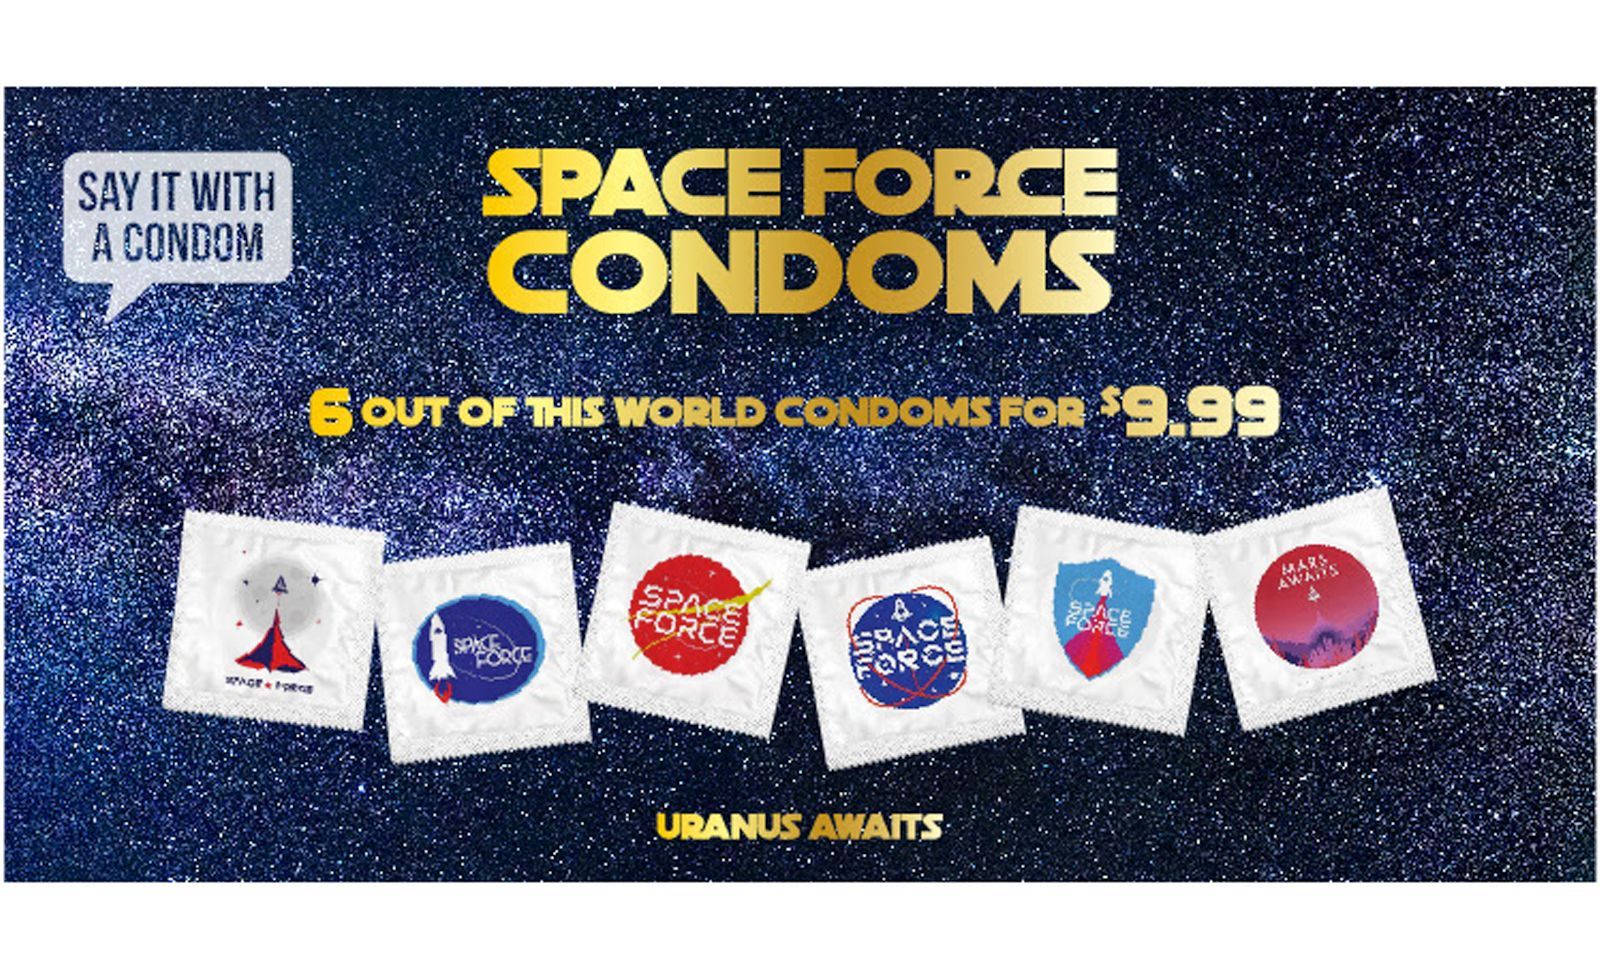 Say It With A Condom’s Space Force Condoms Are Out of This World